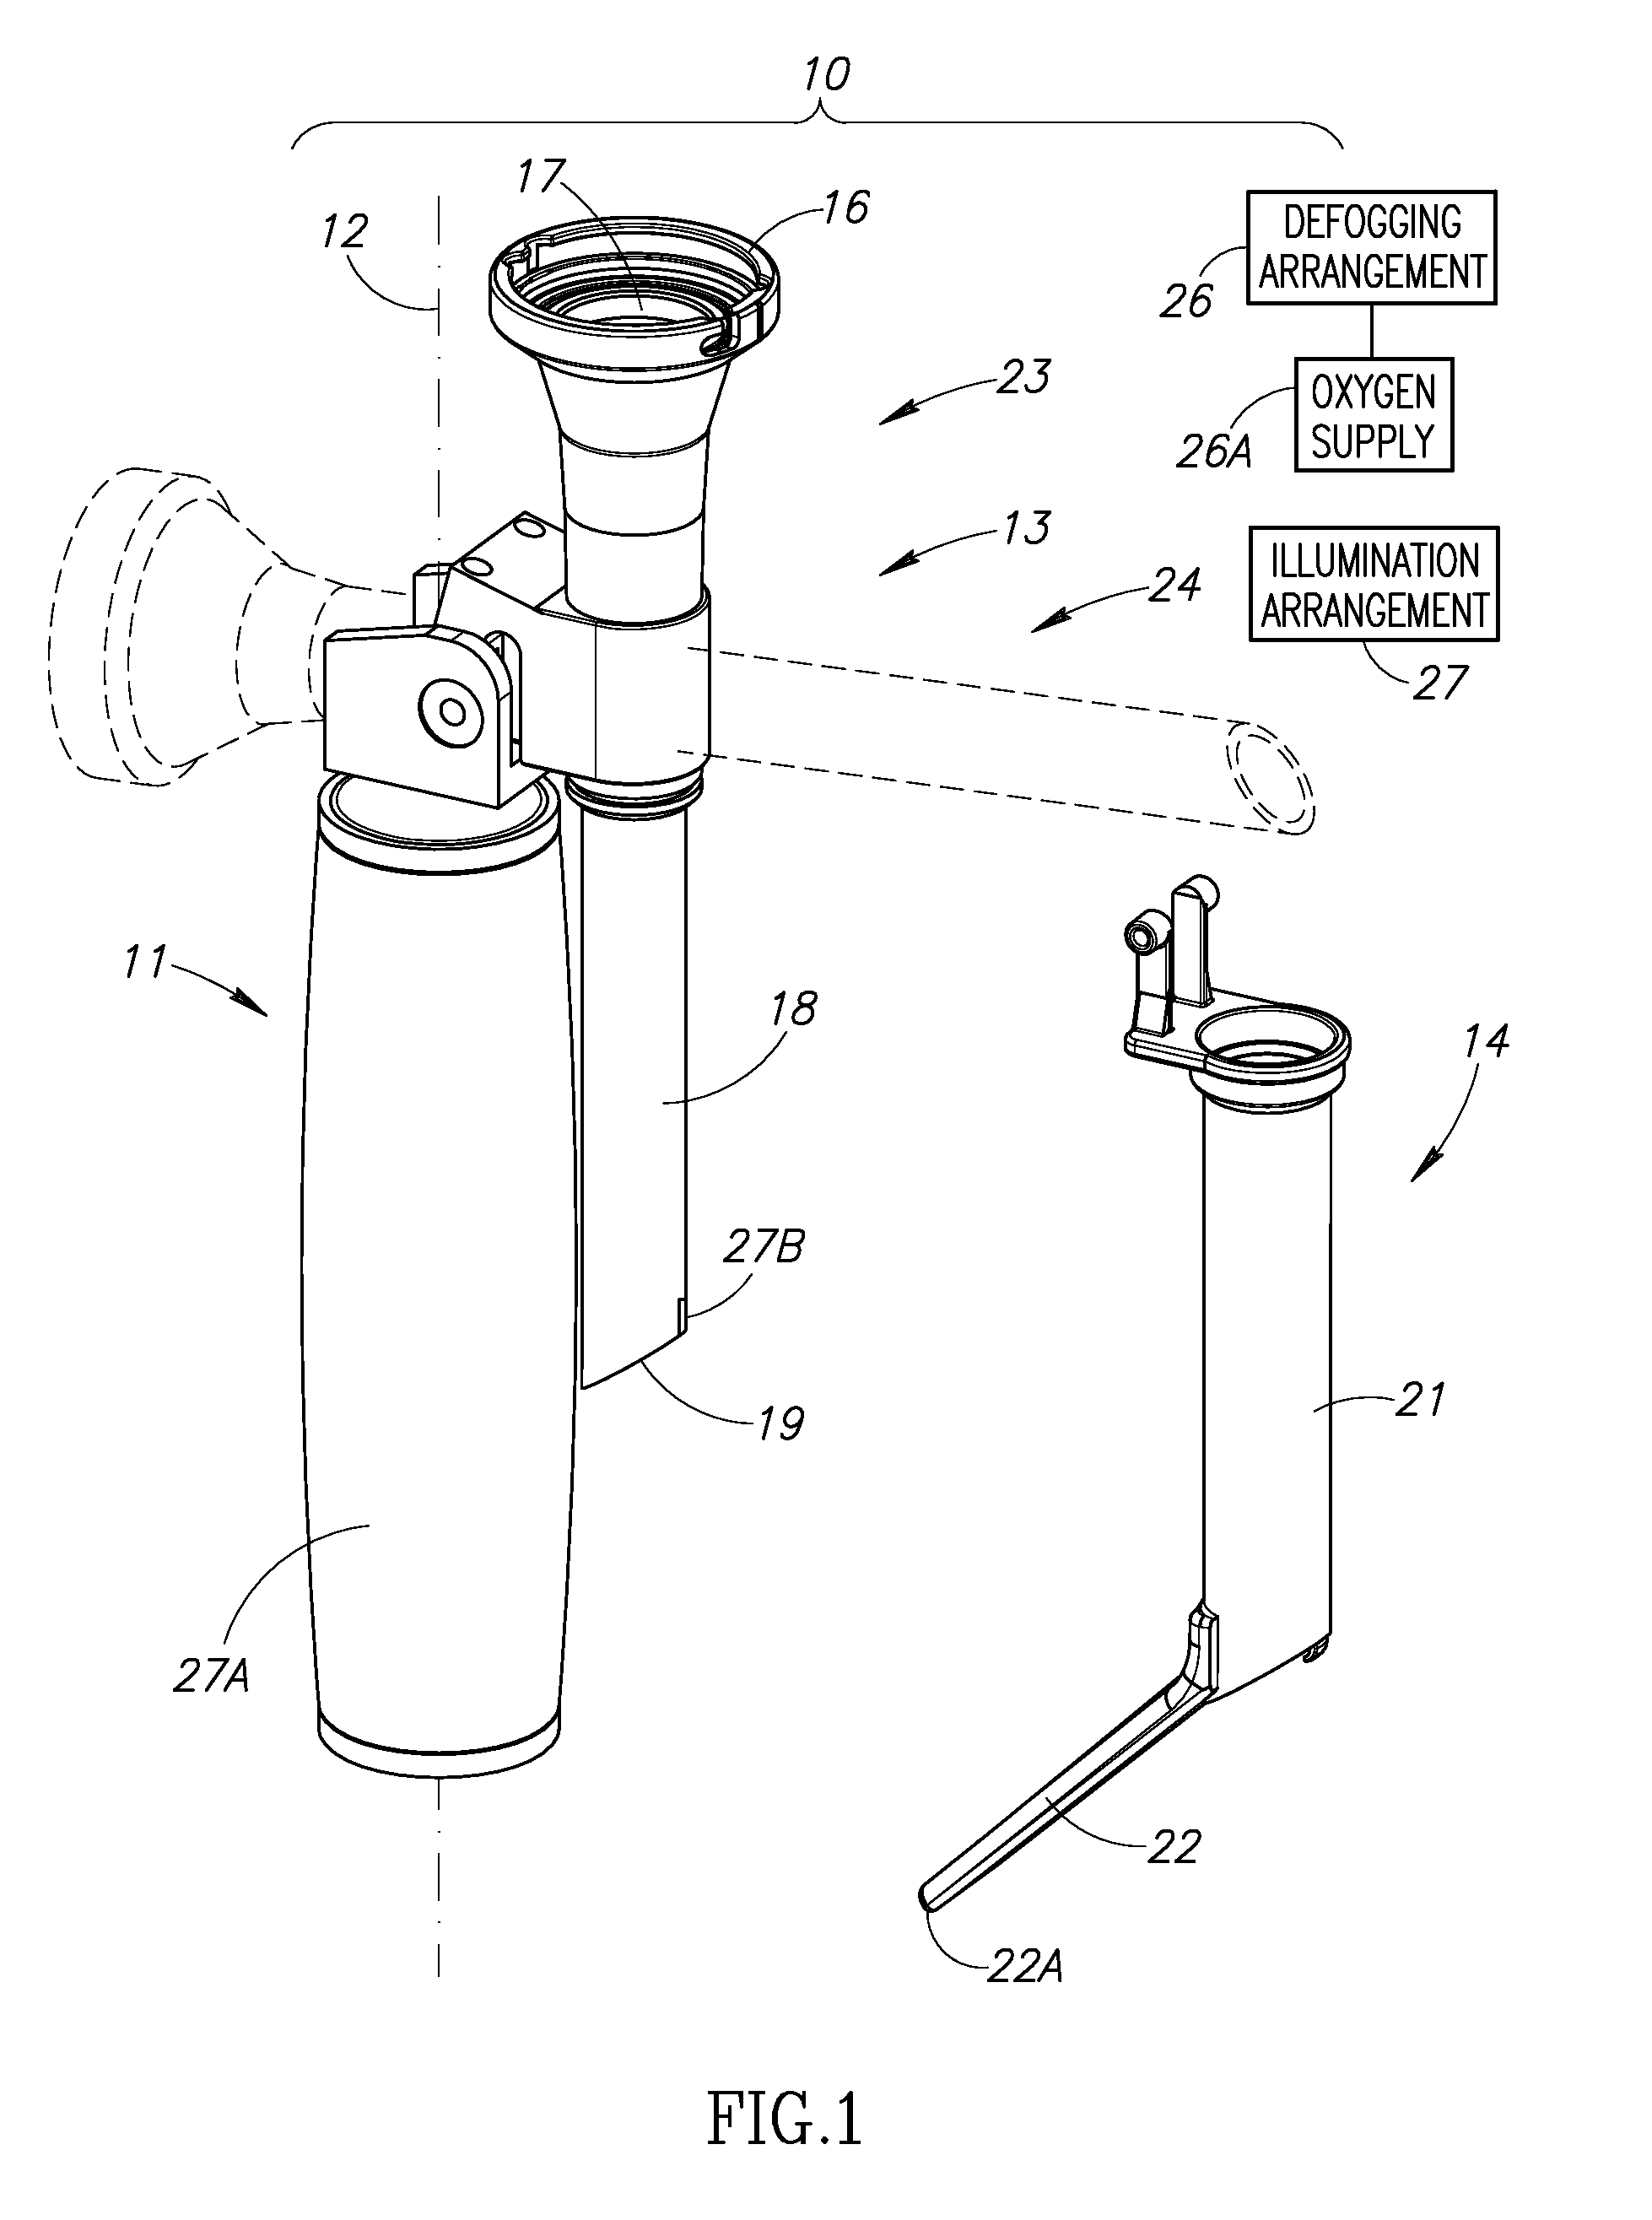 Laryngoscope assembly with enhanced viewing capability